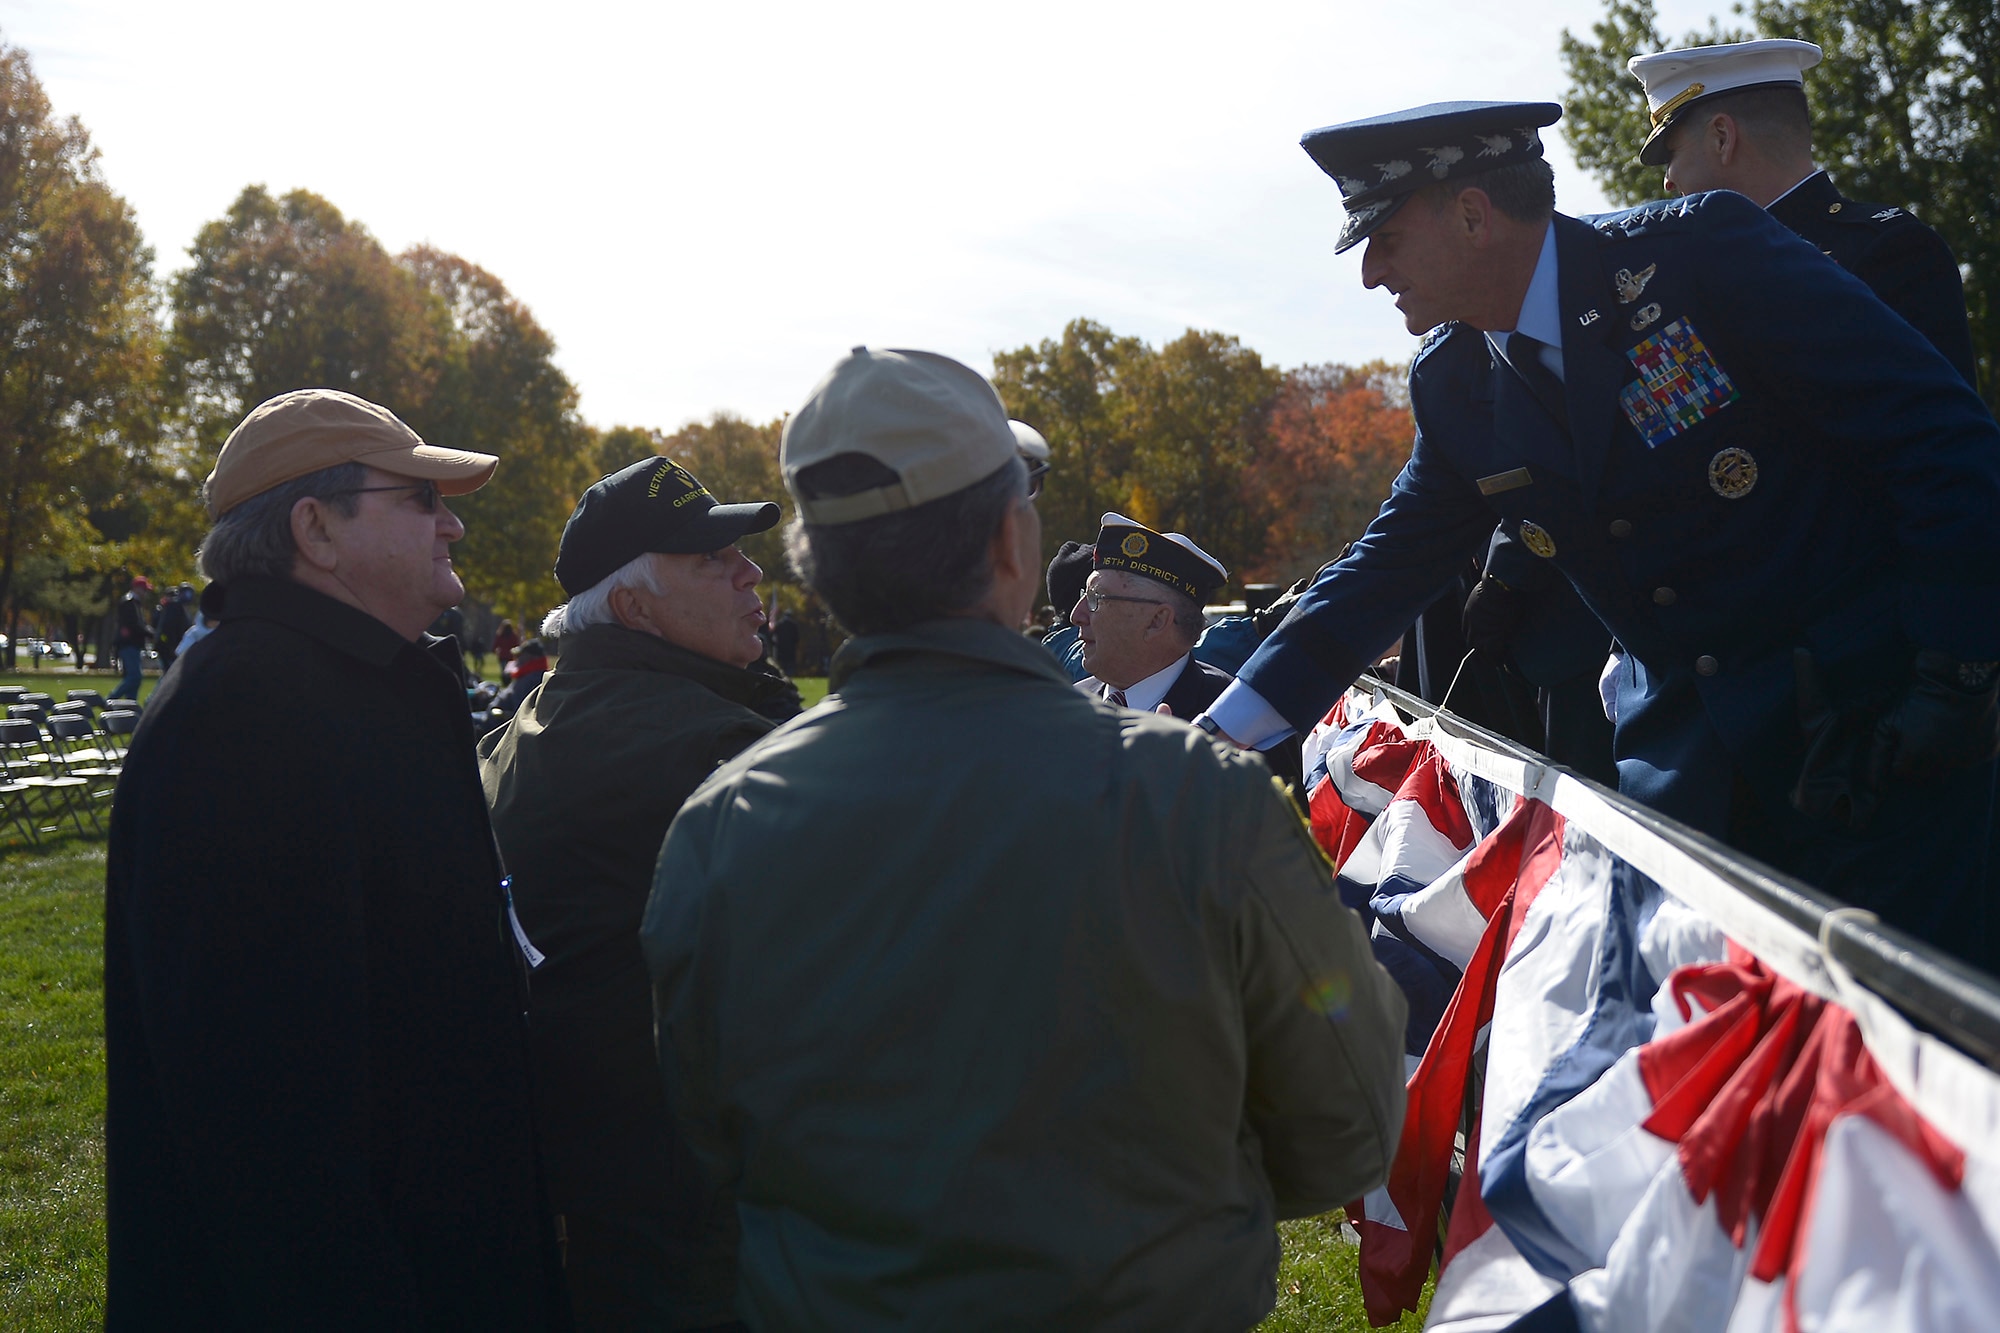 Air Force Chief of Staff Gen. David L. Goldfein shakes hands with veterans who attended this year’s Veterans Day ceremony at Quantico National Cemetery in Quantico, Va., Nov. 11, 2017. The Veterans Day ceremony is an annual event hosted by the Potomac Region Veterans Council. The event featured a performance by the Quantico Marine Corps Band. (U.S. Air Force photo by Tech. Sgt. Dan DeCook)